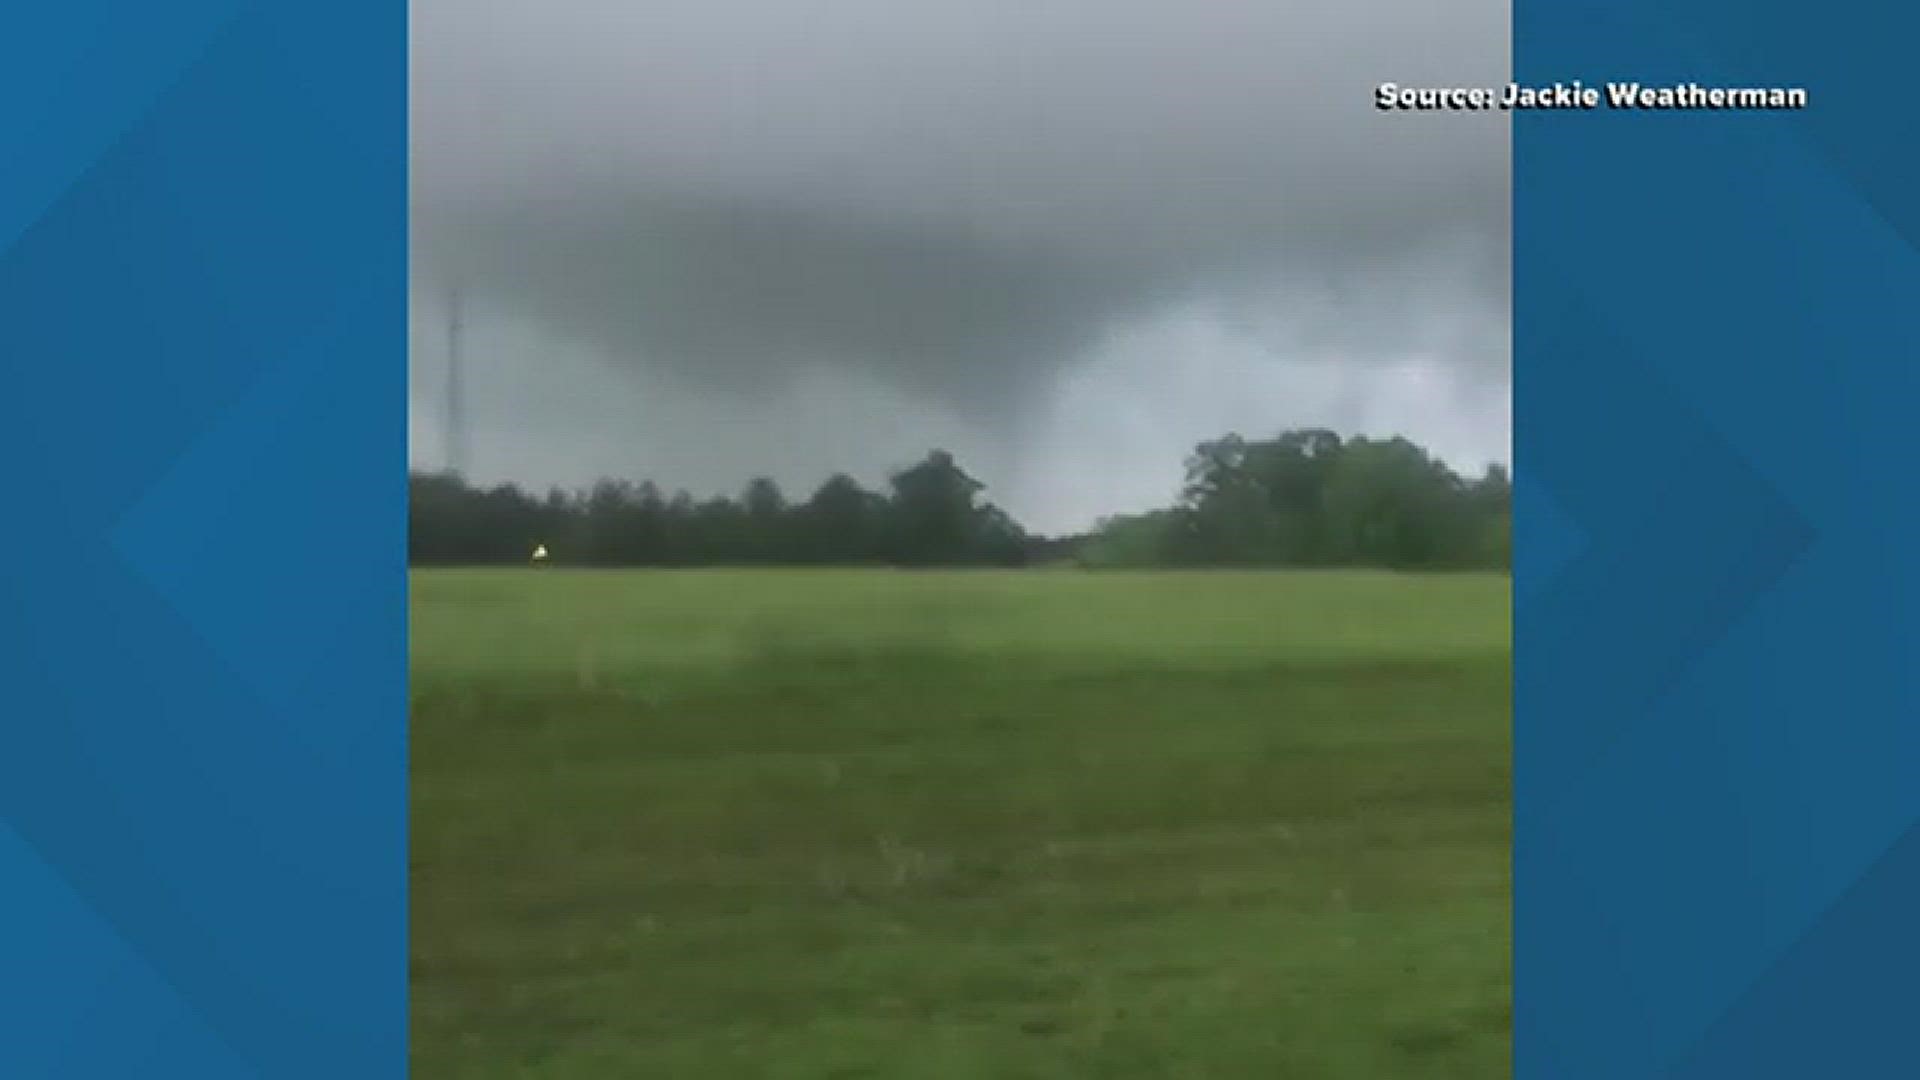 Video from Jackie Weatherman shows a massive storm system moving across Wentworth. The same system produced a tornado that caused heavy damage to the area.